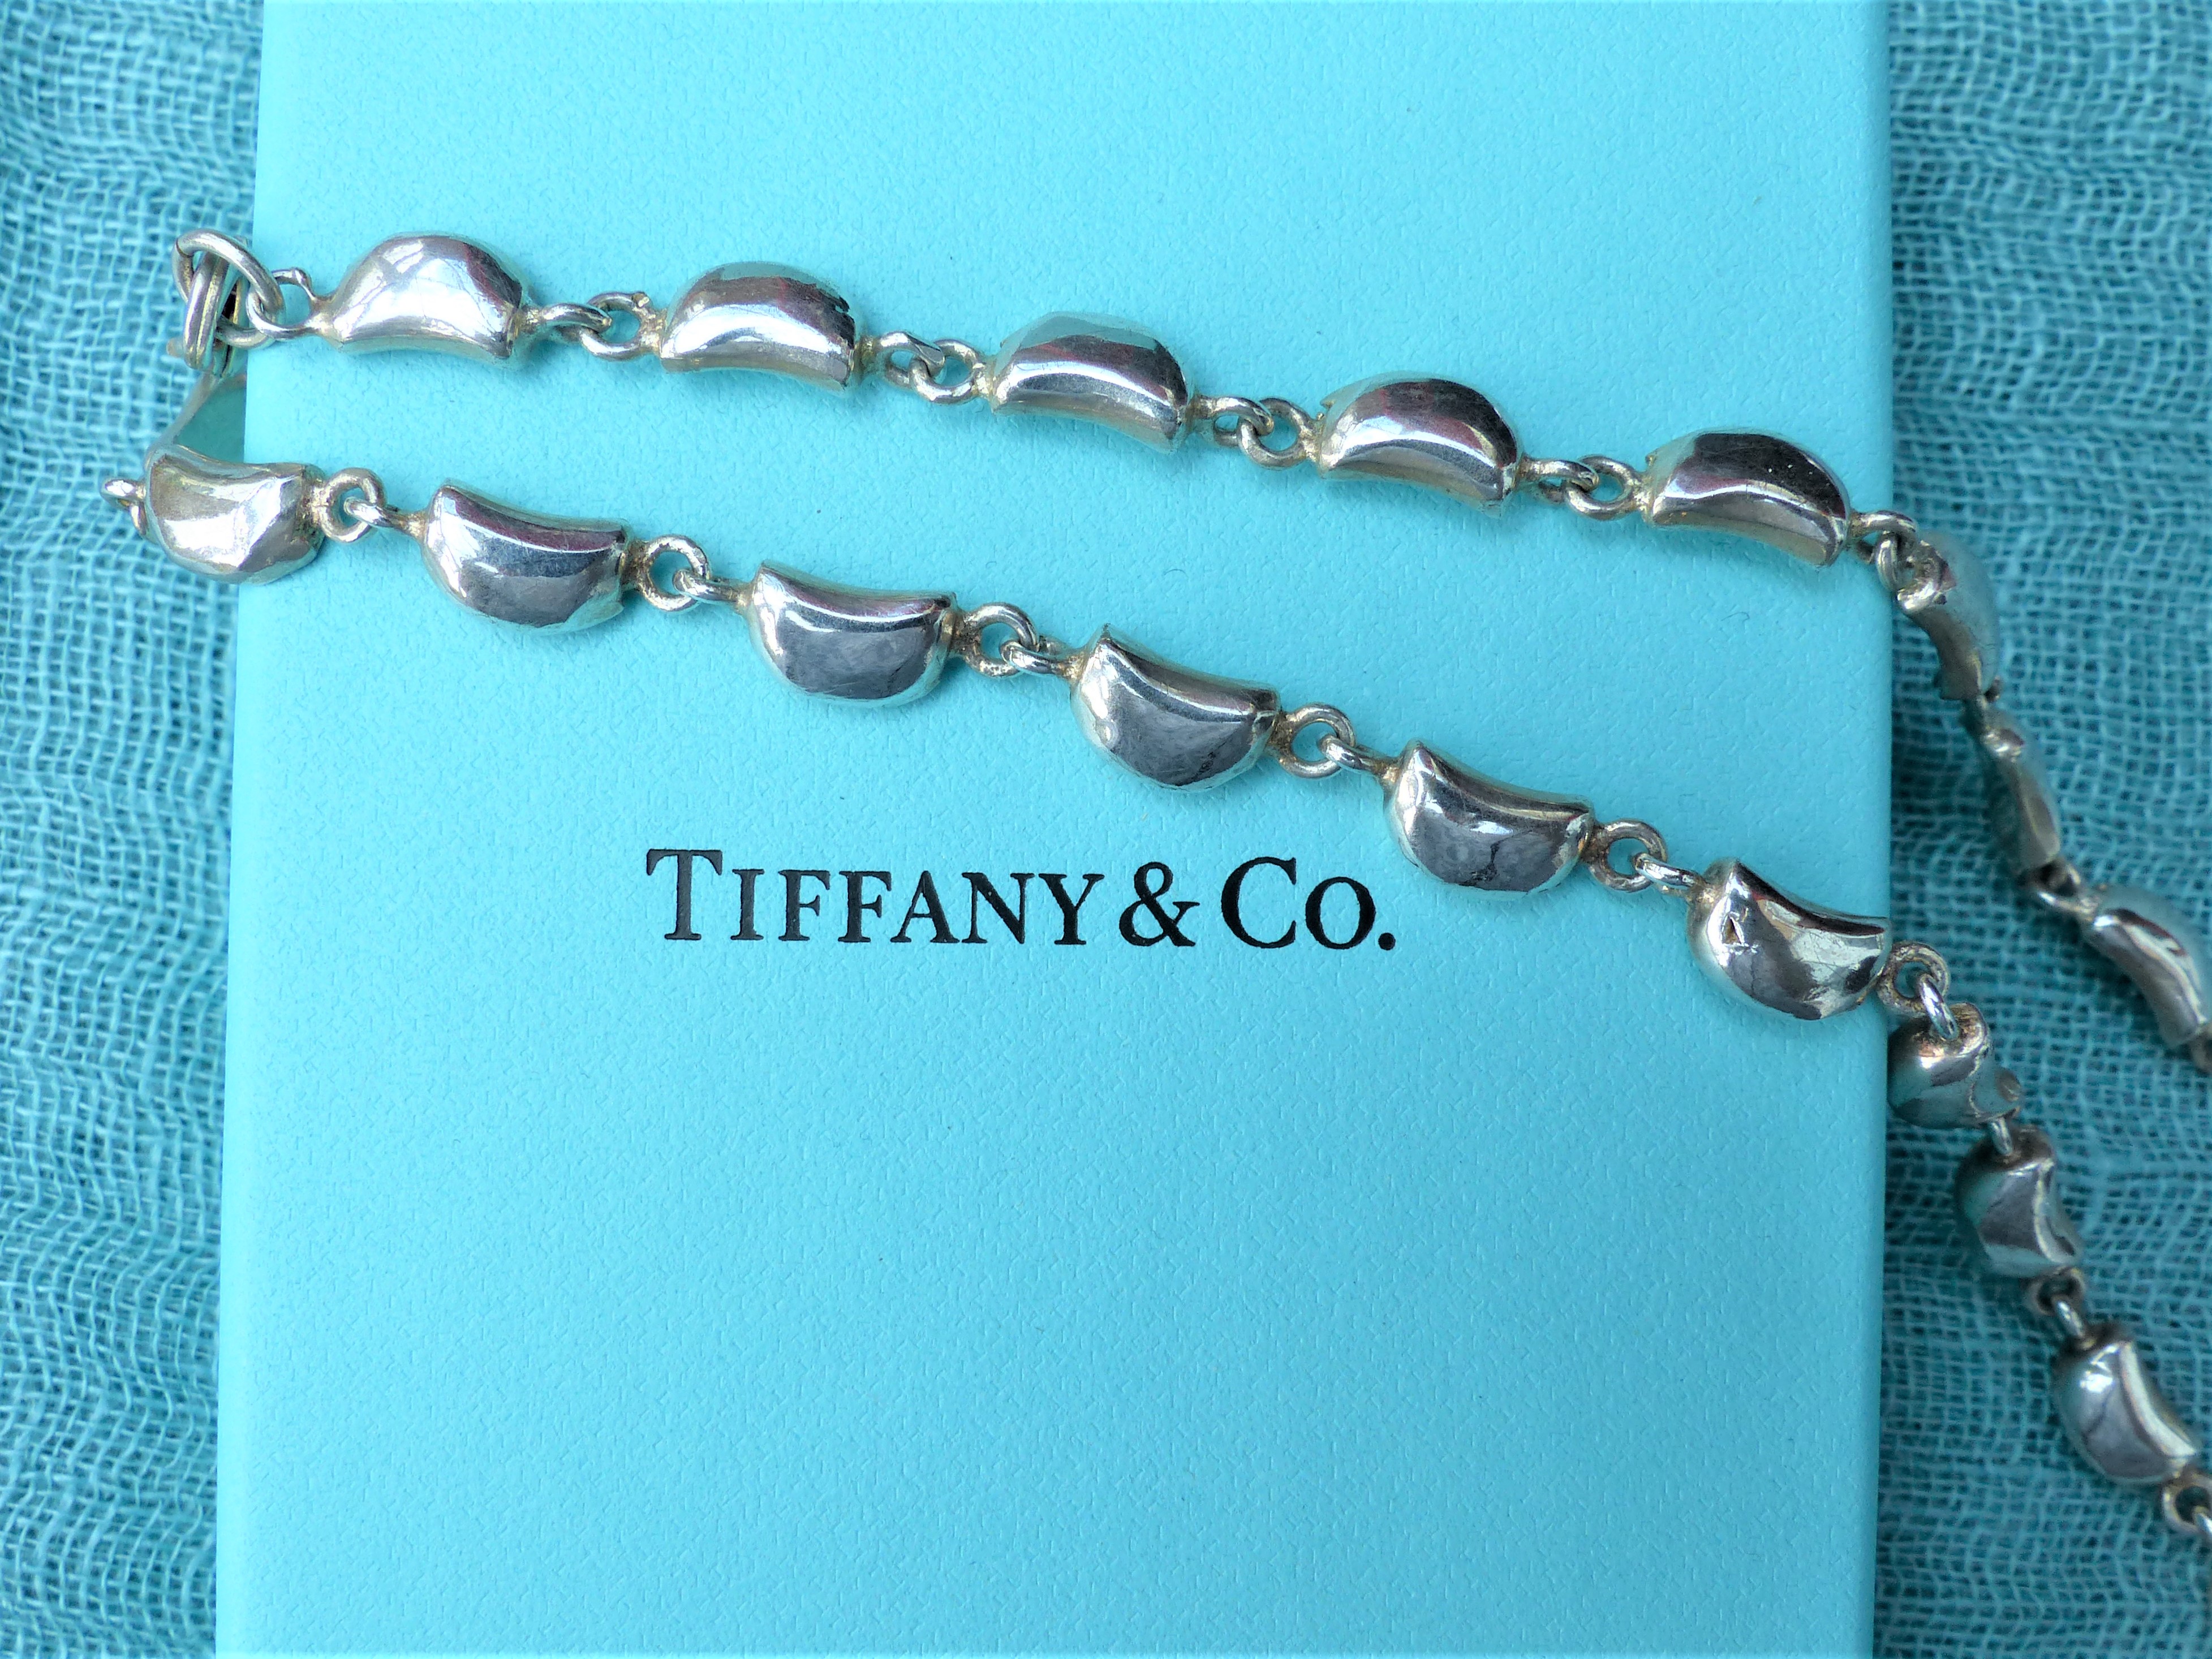 TIFFANY & CO STERLING SILVER THICK NECKLACE - HAVE 77GRAMS 15 INCH LONG  BRACELET | eBay